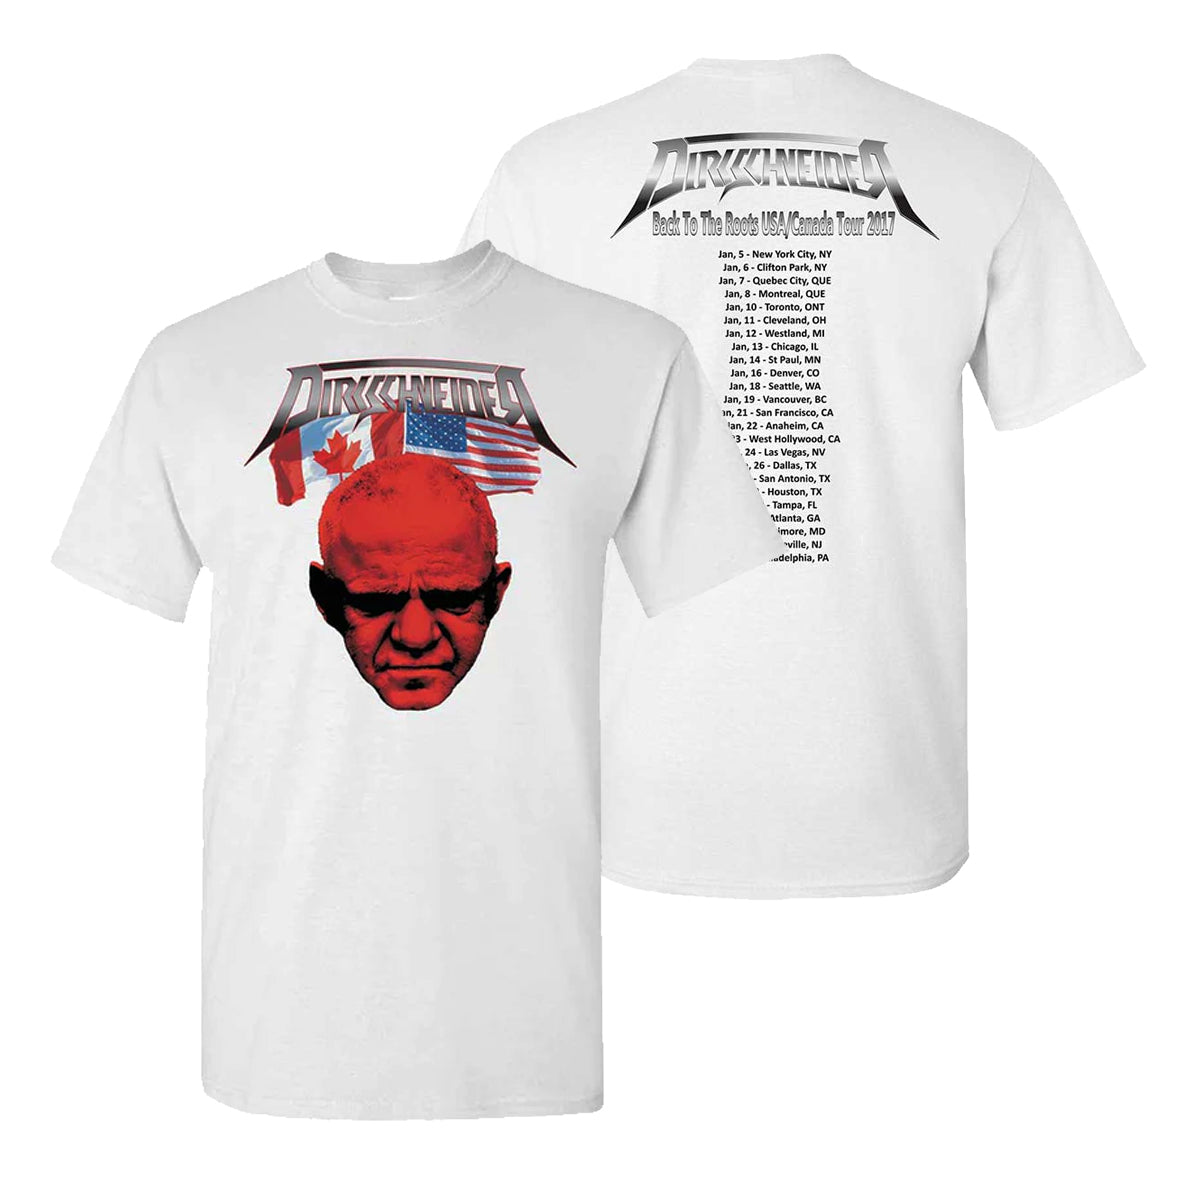 Flags and Tour Dates White T-Shirt